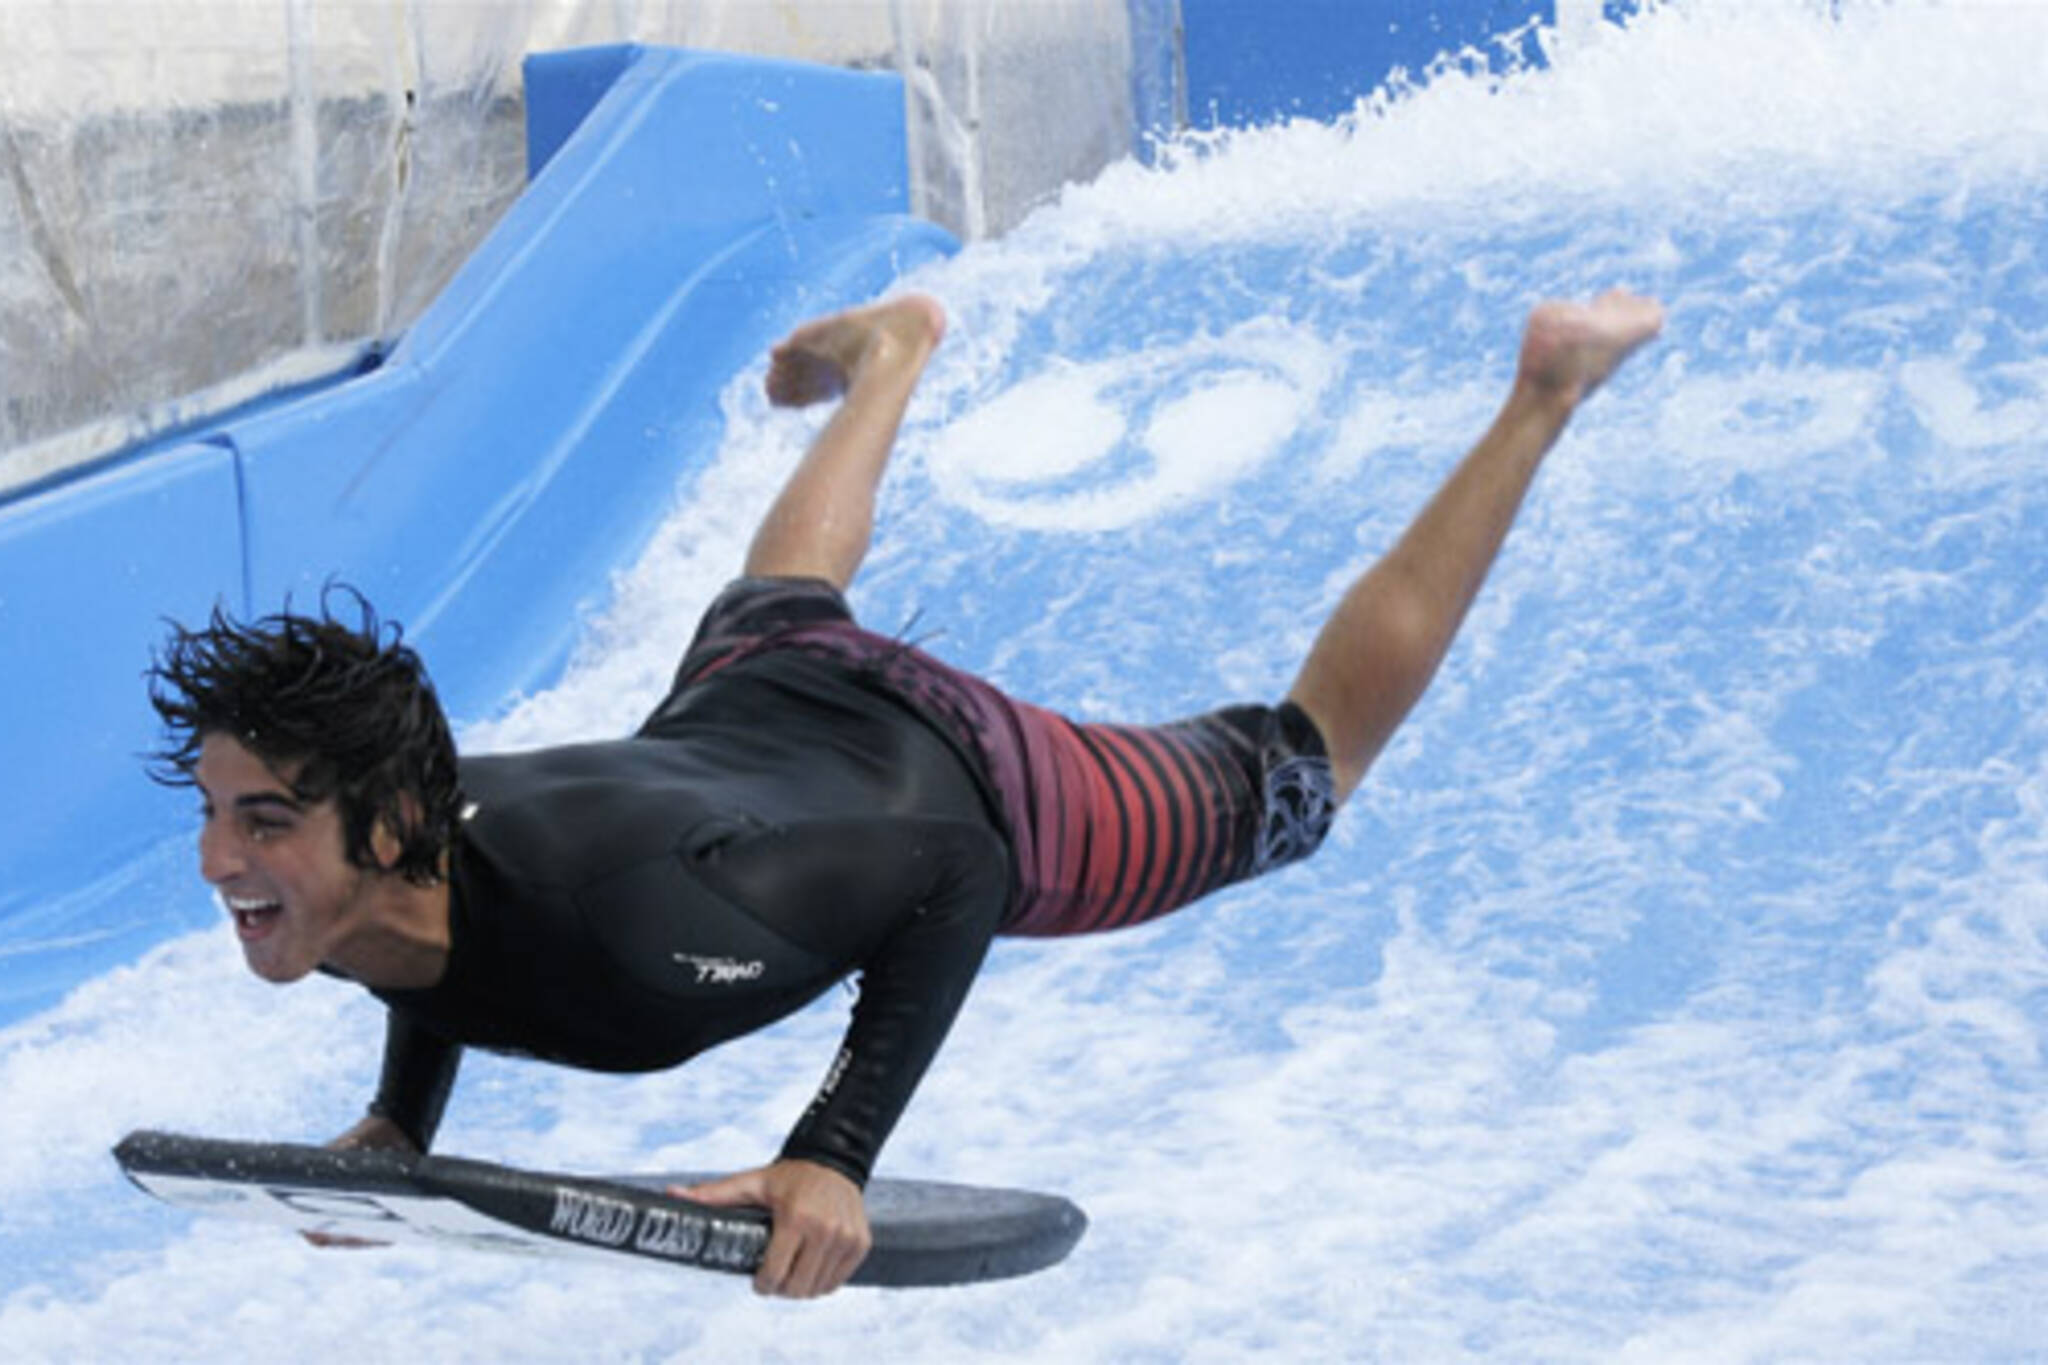 Flowrider demo at the CNE